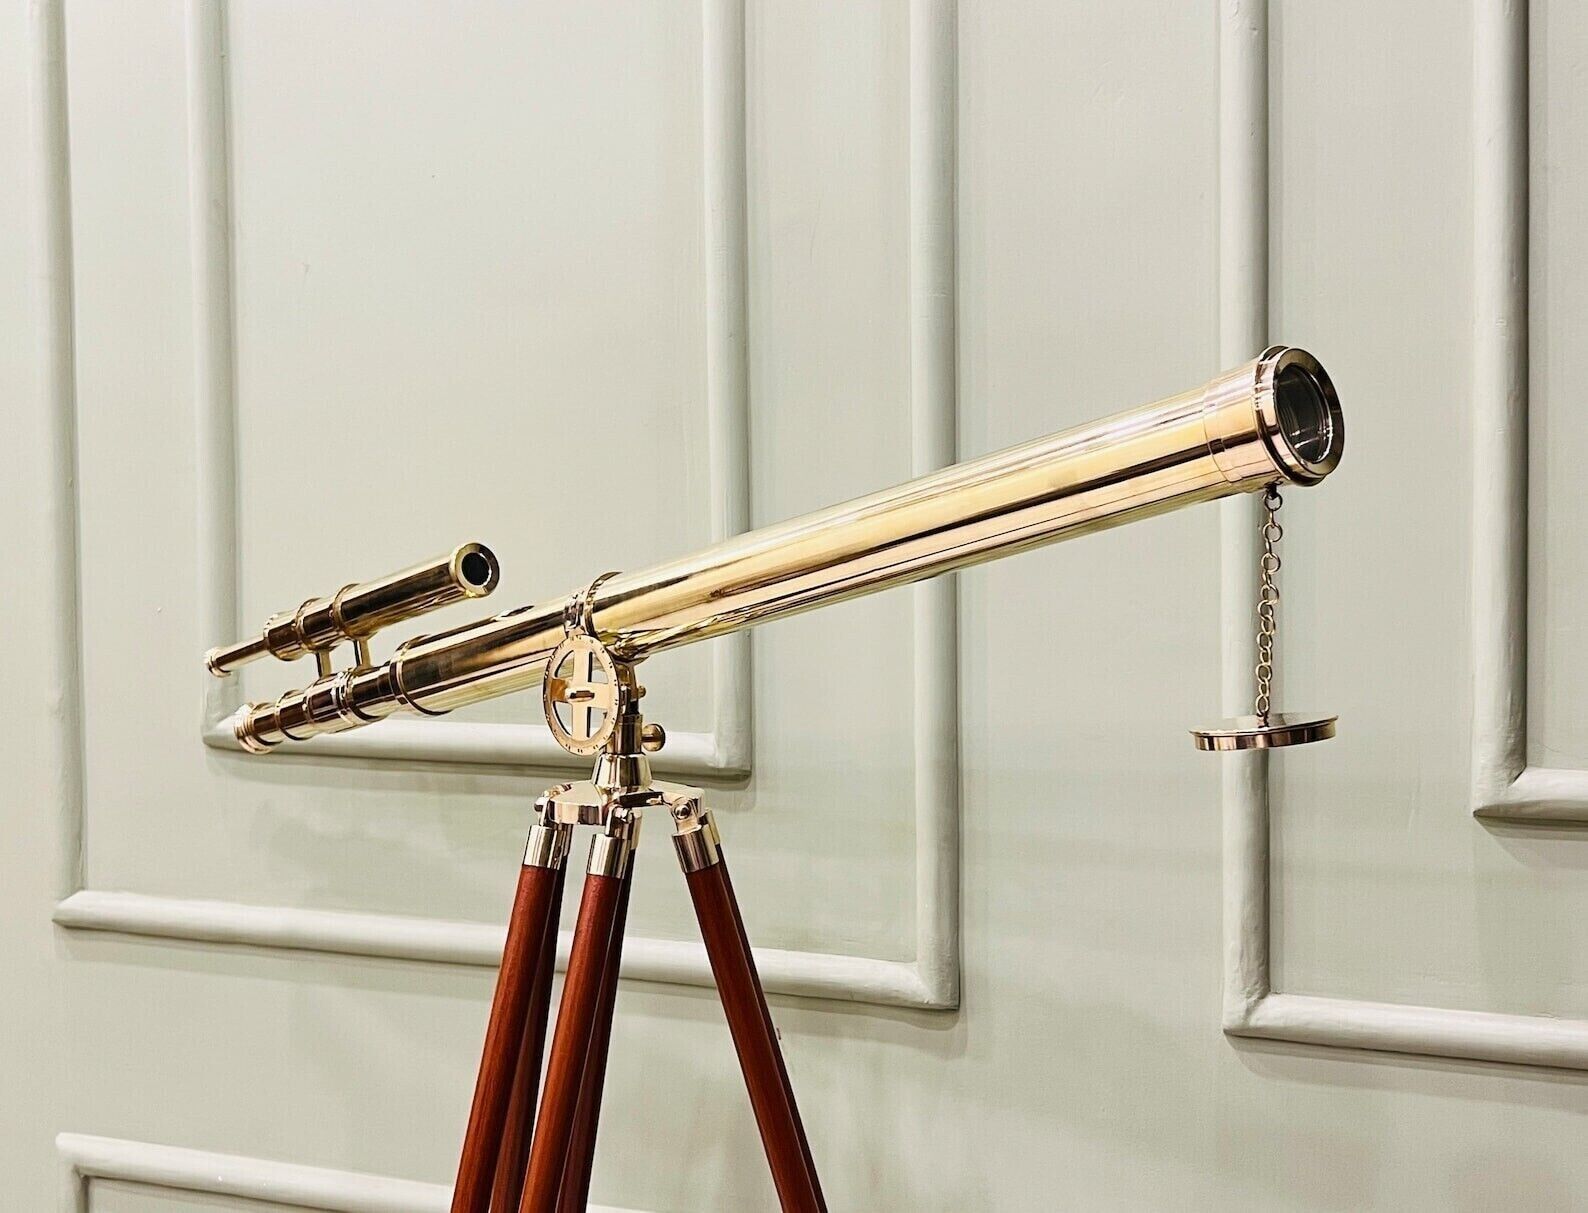 Brass Telescope for Distant Views, Long-standing Nautical Home Decorative gift